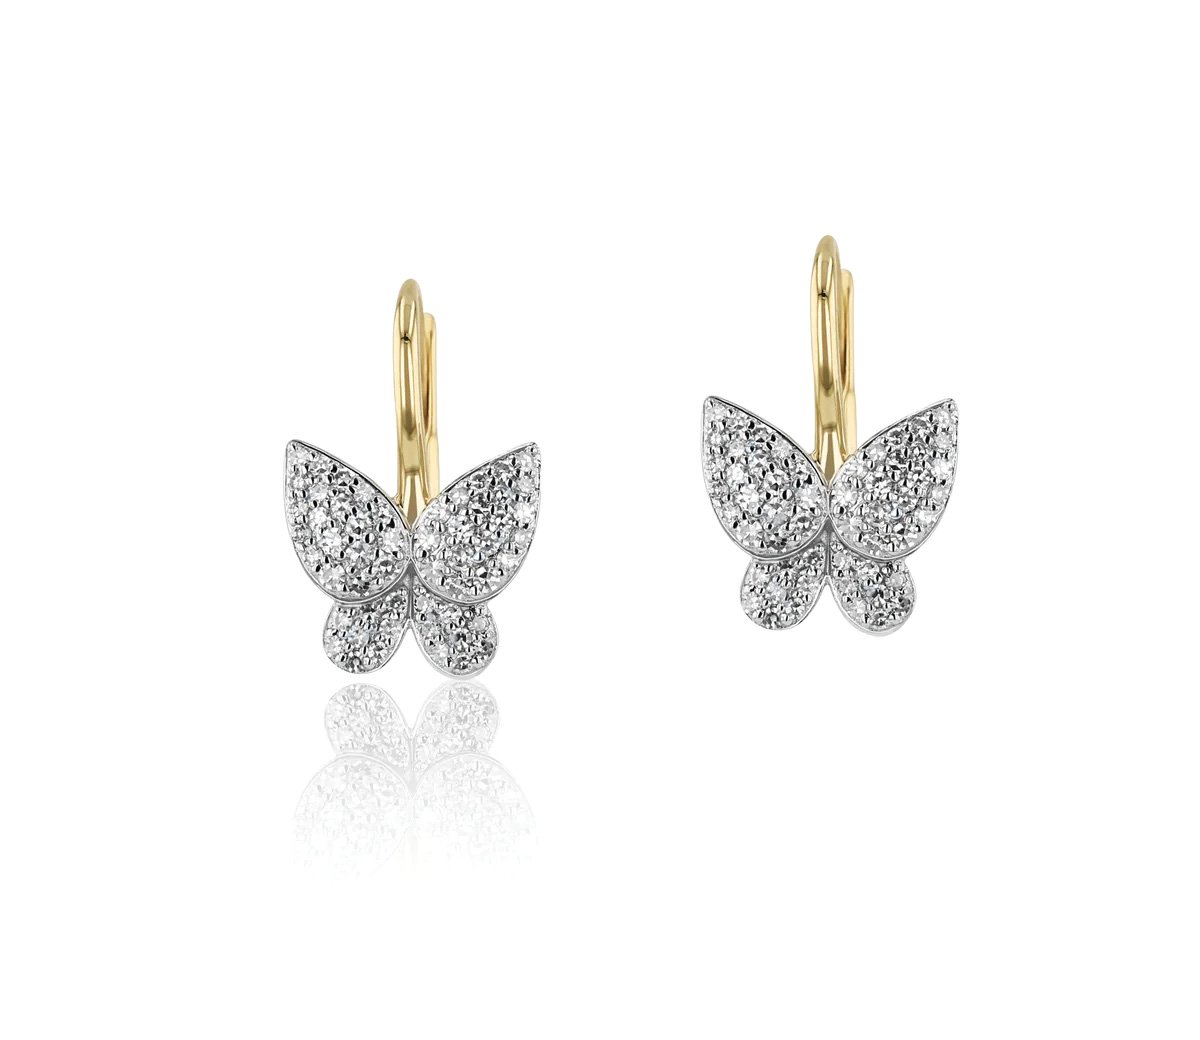 Phillips House "Affair" 14kt Yellow Gold Petite Butterfly Leverbacks